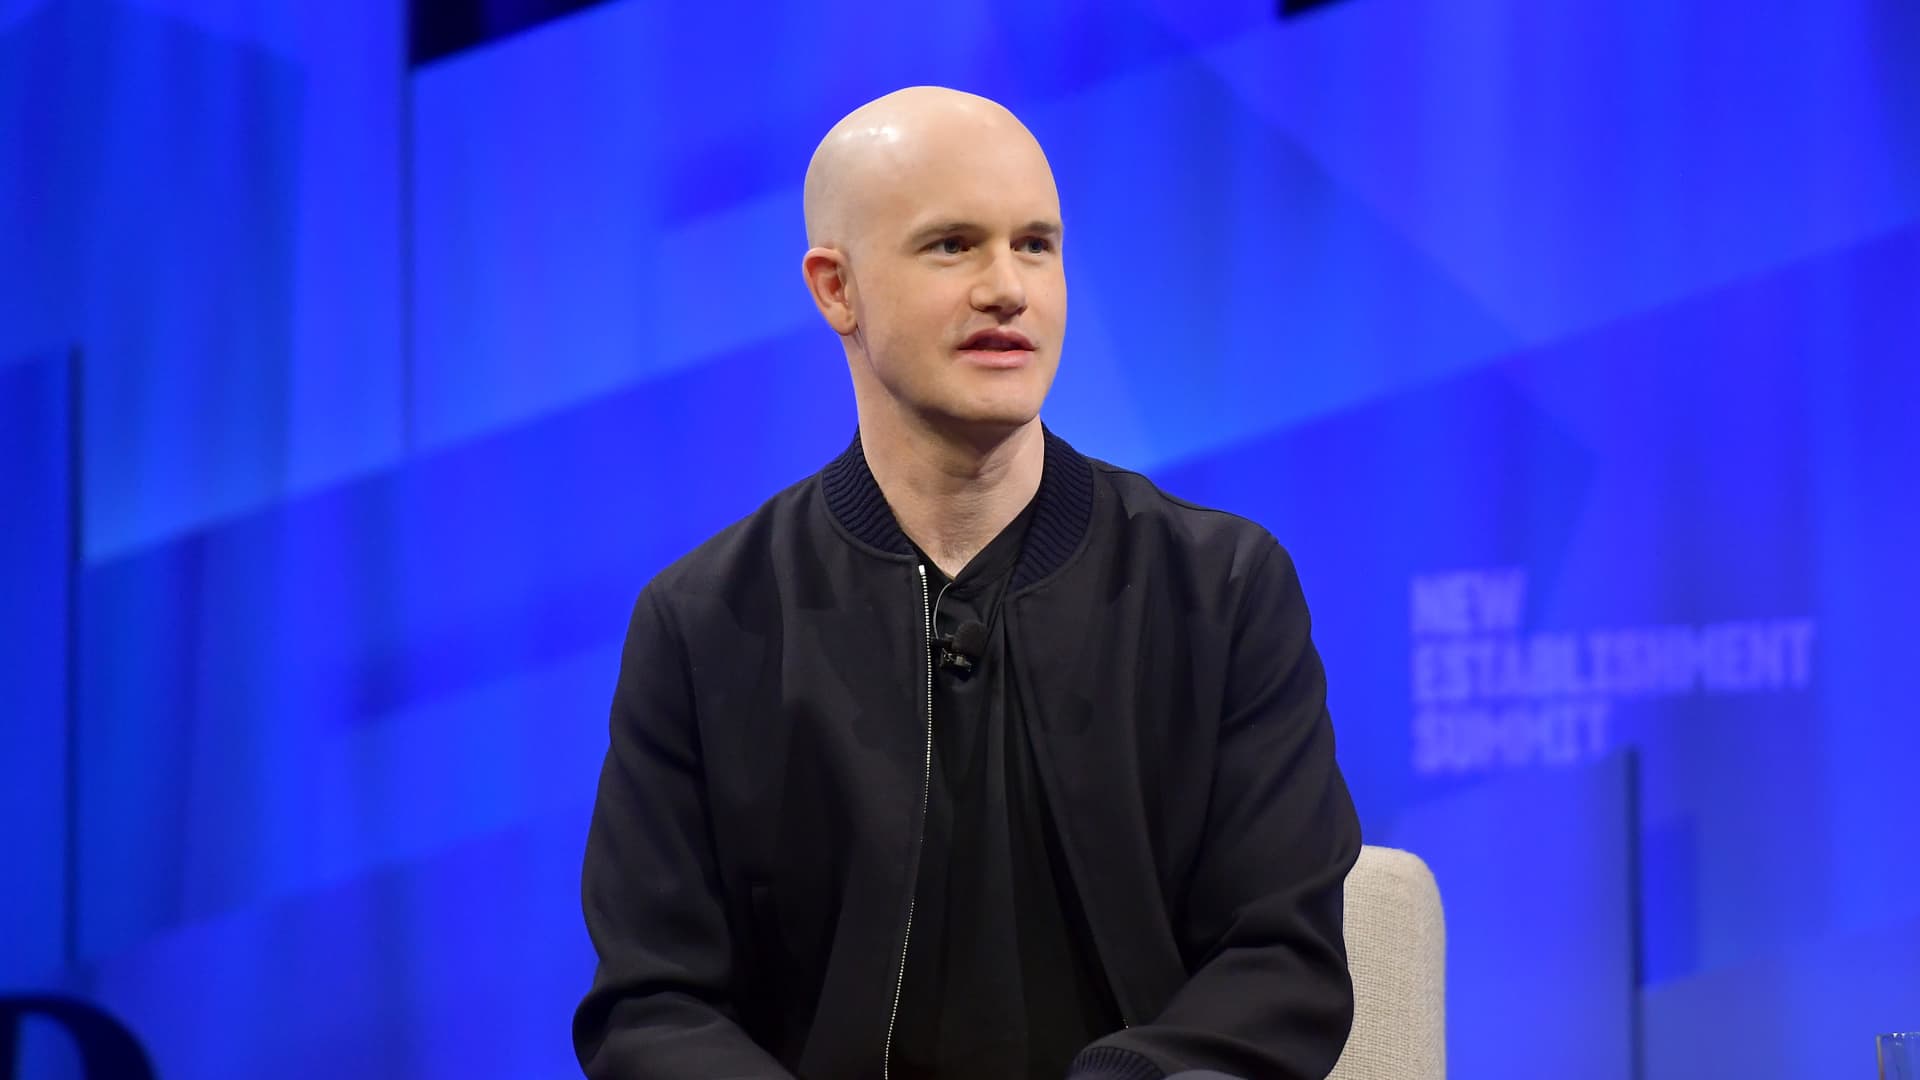 Coinbase hiring pause for ‘foreseeable future’ and will rescind offers